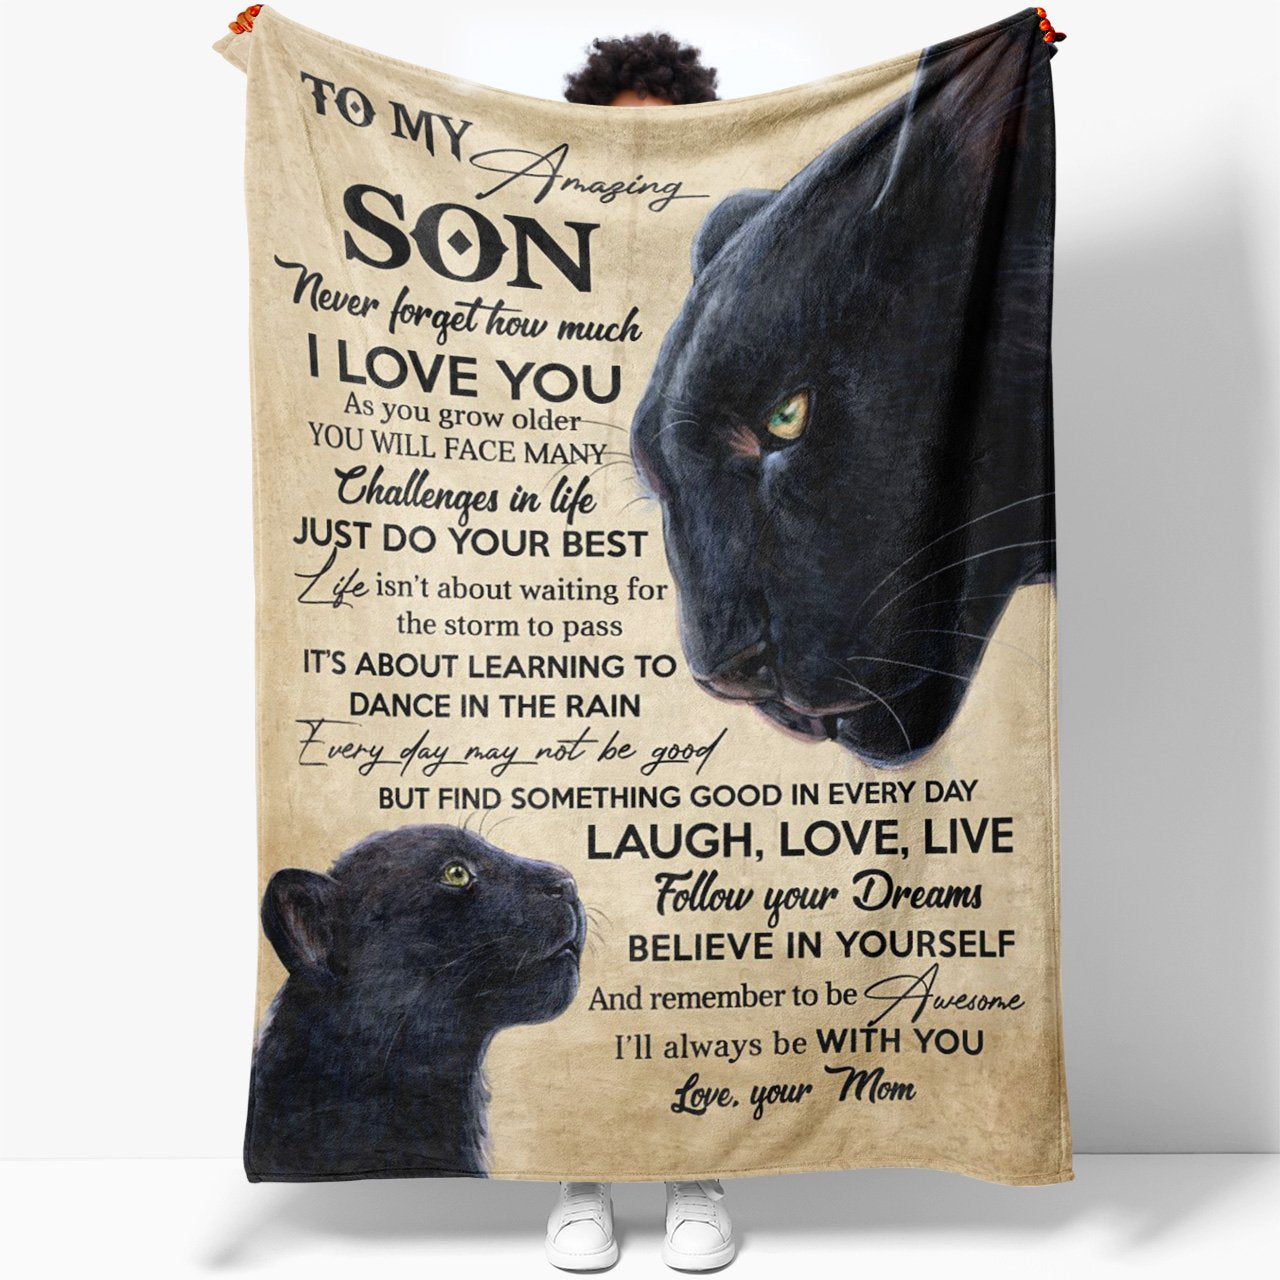 To My Amazing Black Panther Son Blanket, You Will Face Many Challenges in Life Blanket, Meaningful Graduation Christmas Birthday Gift Ideas For Son